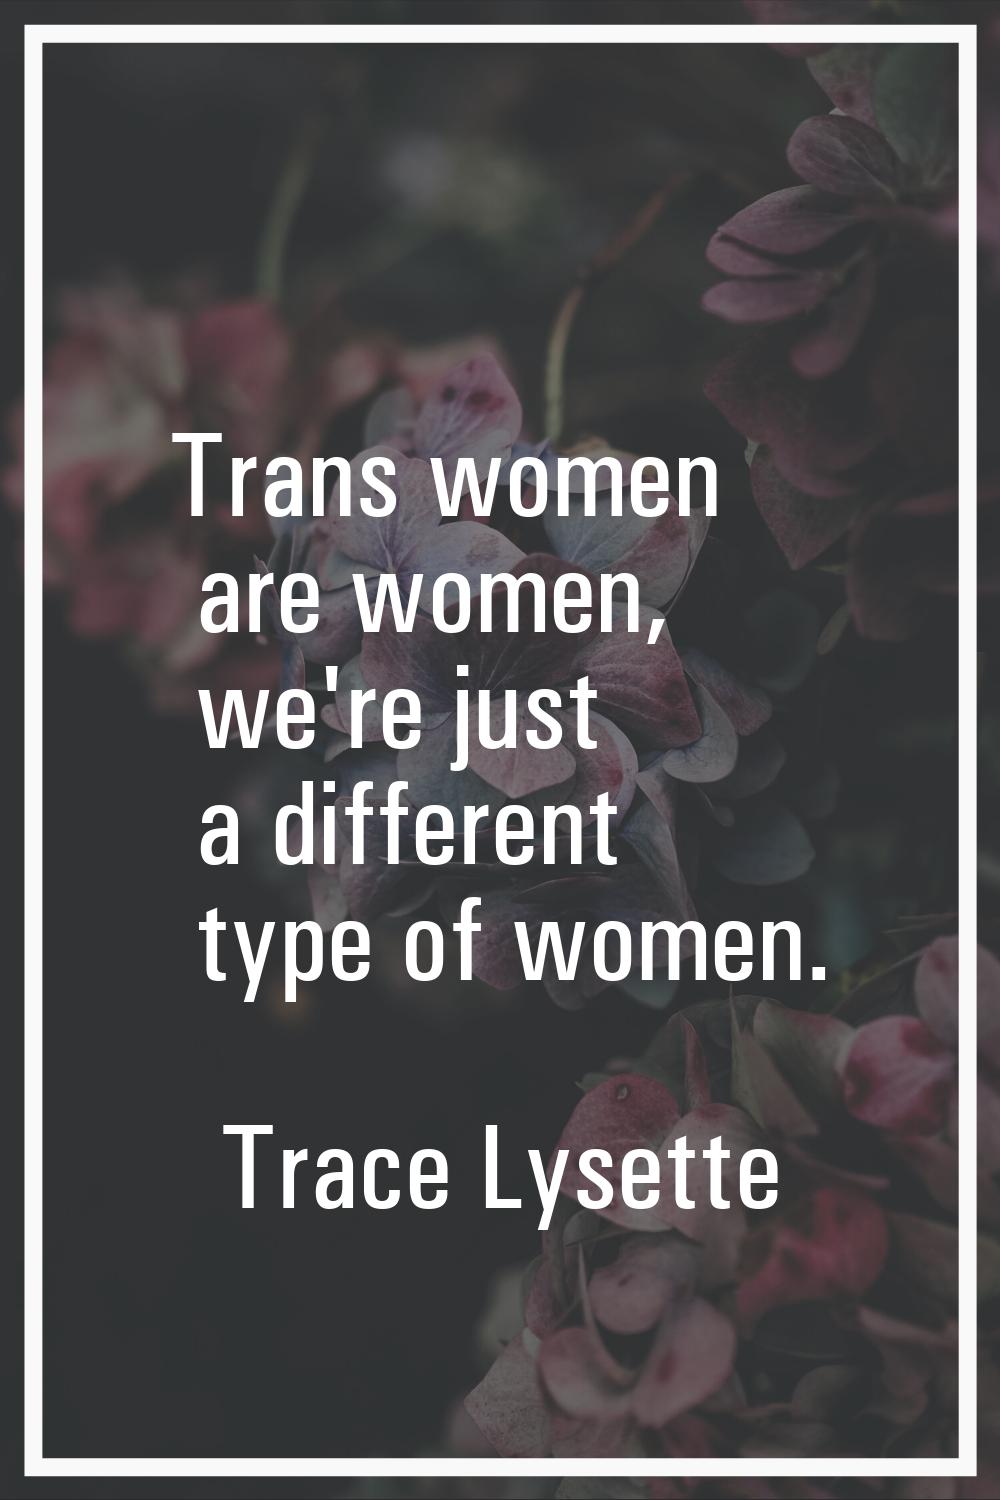 Trans women are women, we're just a different type of women.